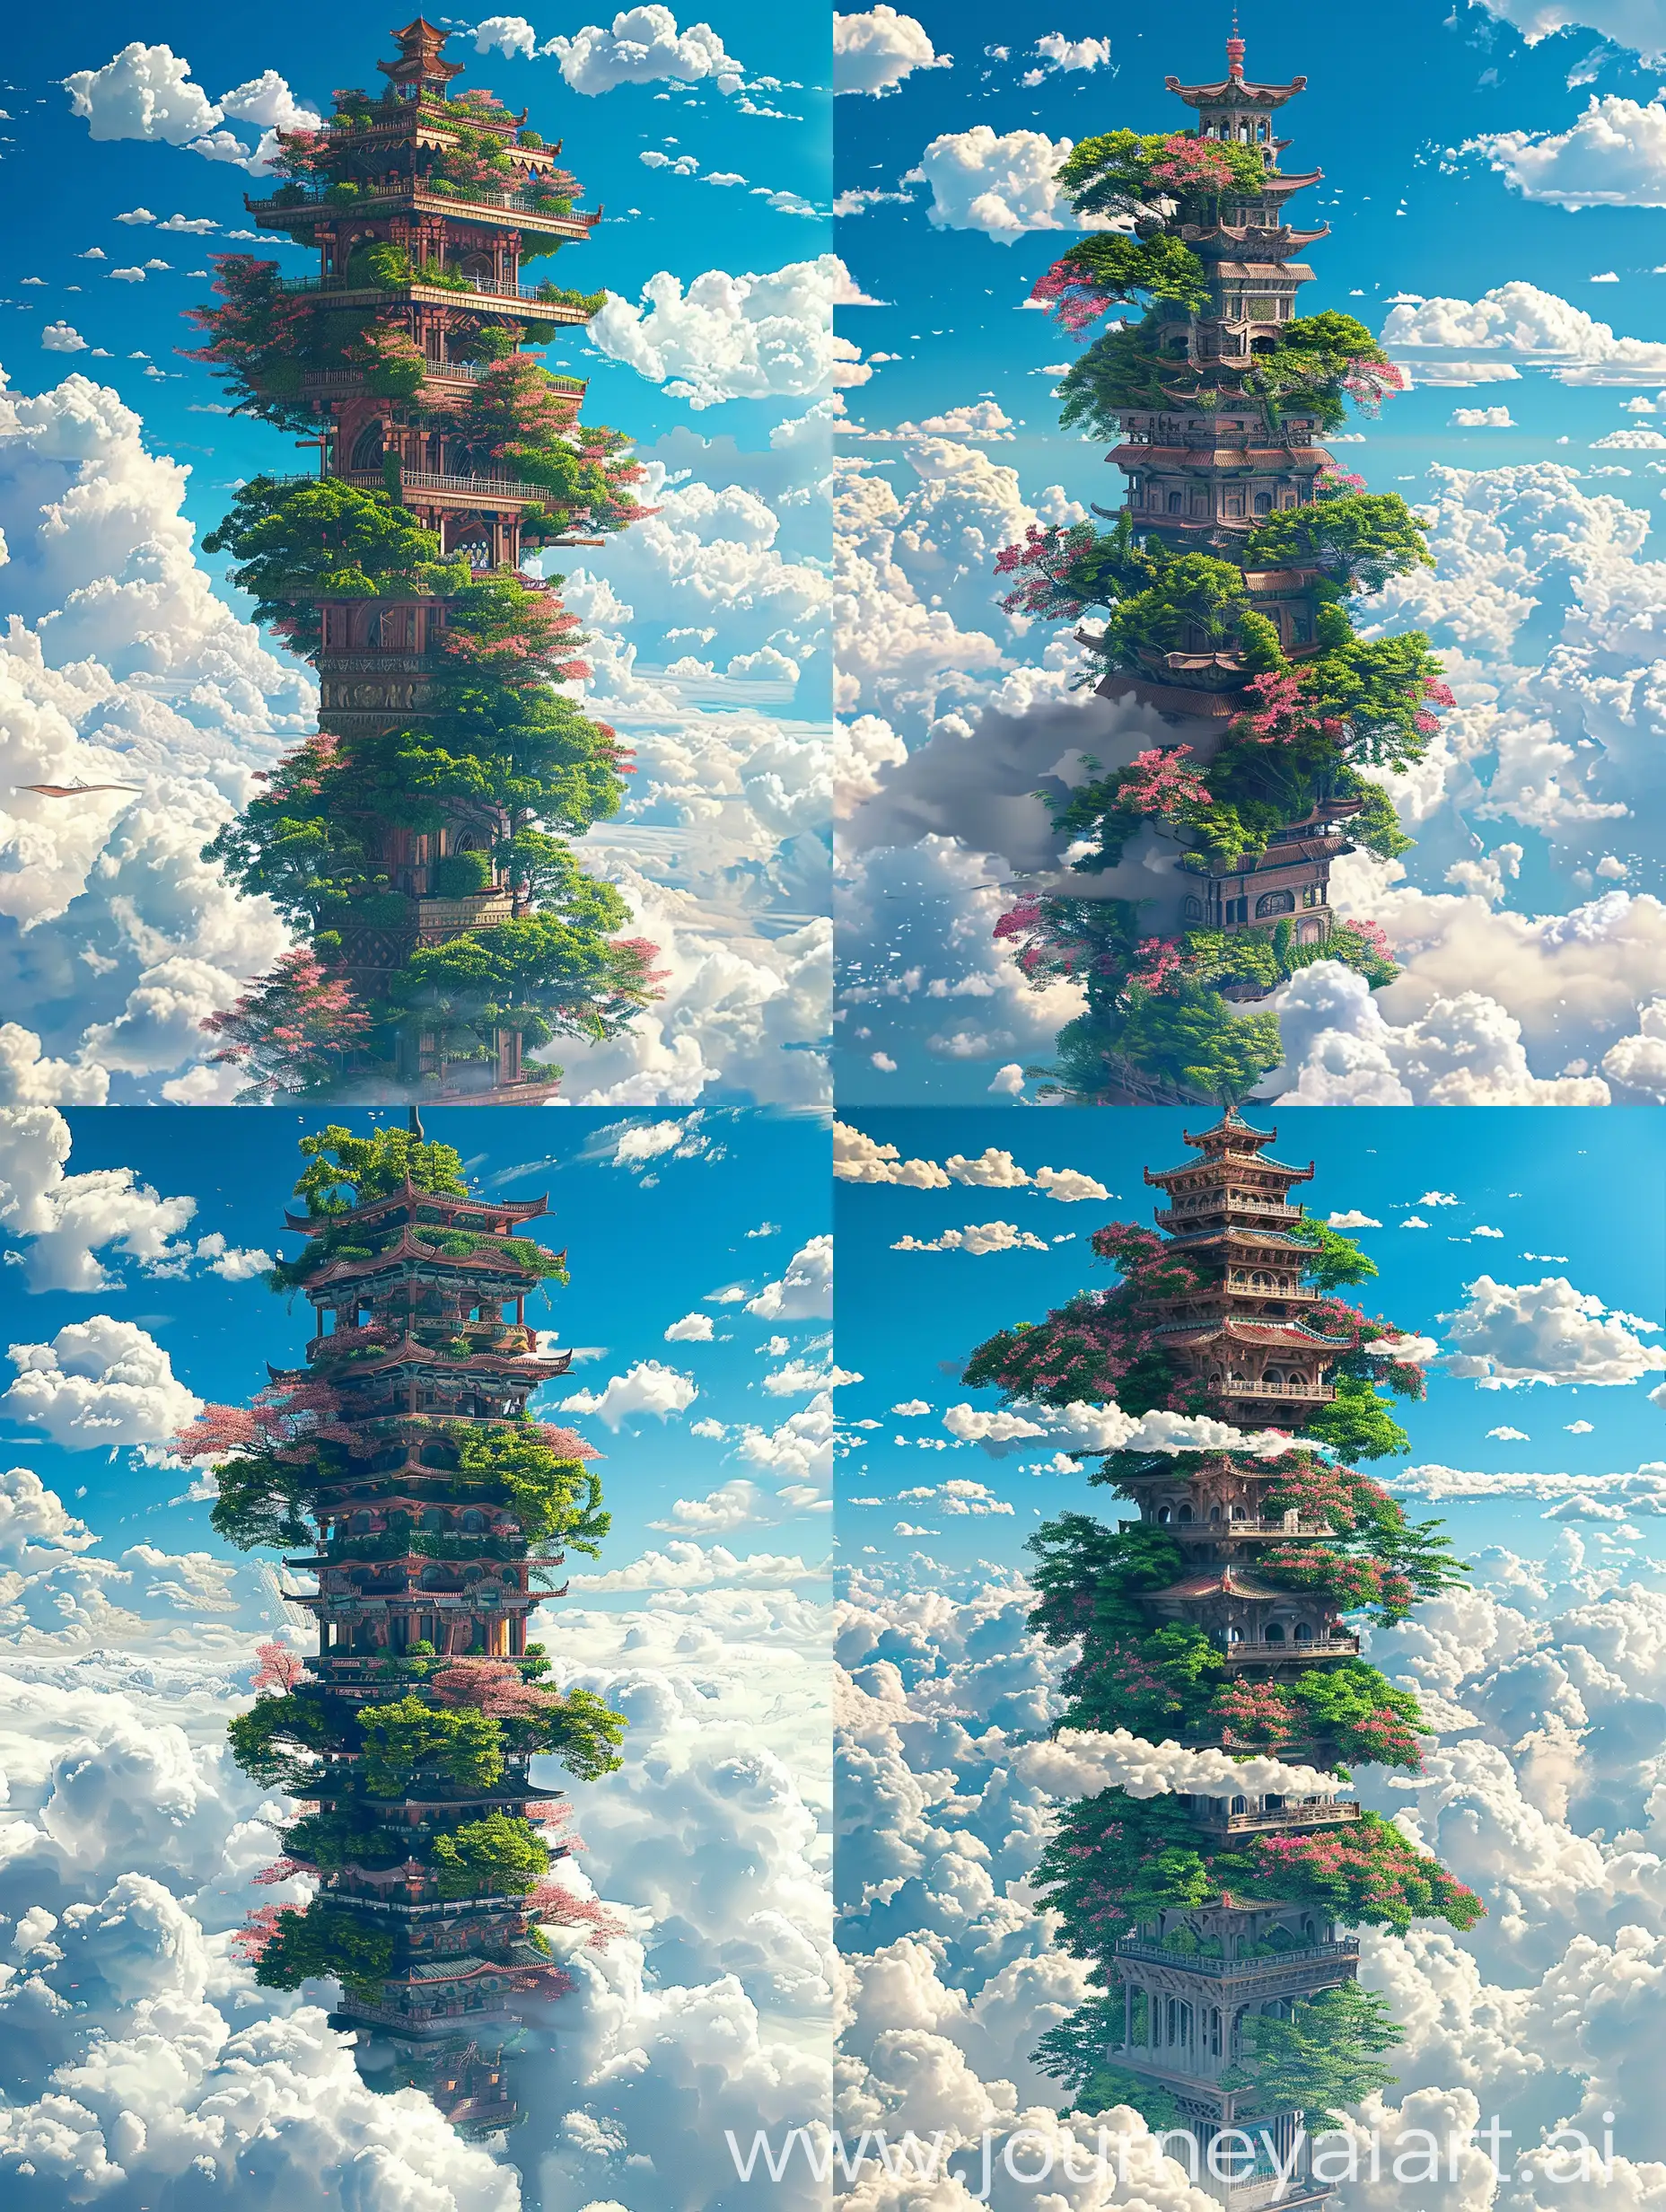 Enchanted-Tower-Among-Clouds-with-Lush-Greenery-and-Pink-Trees